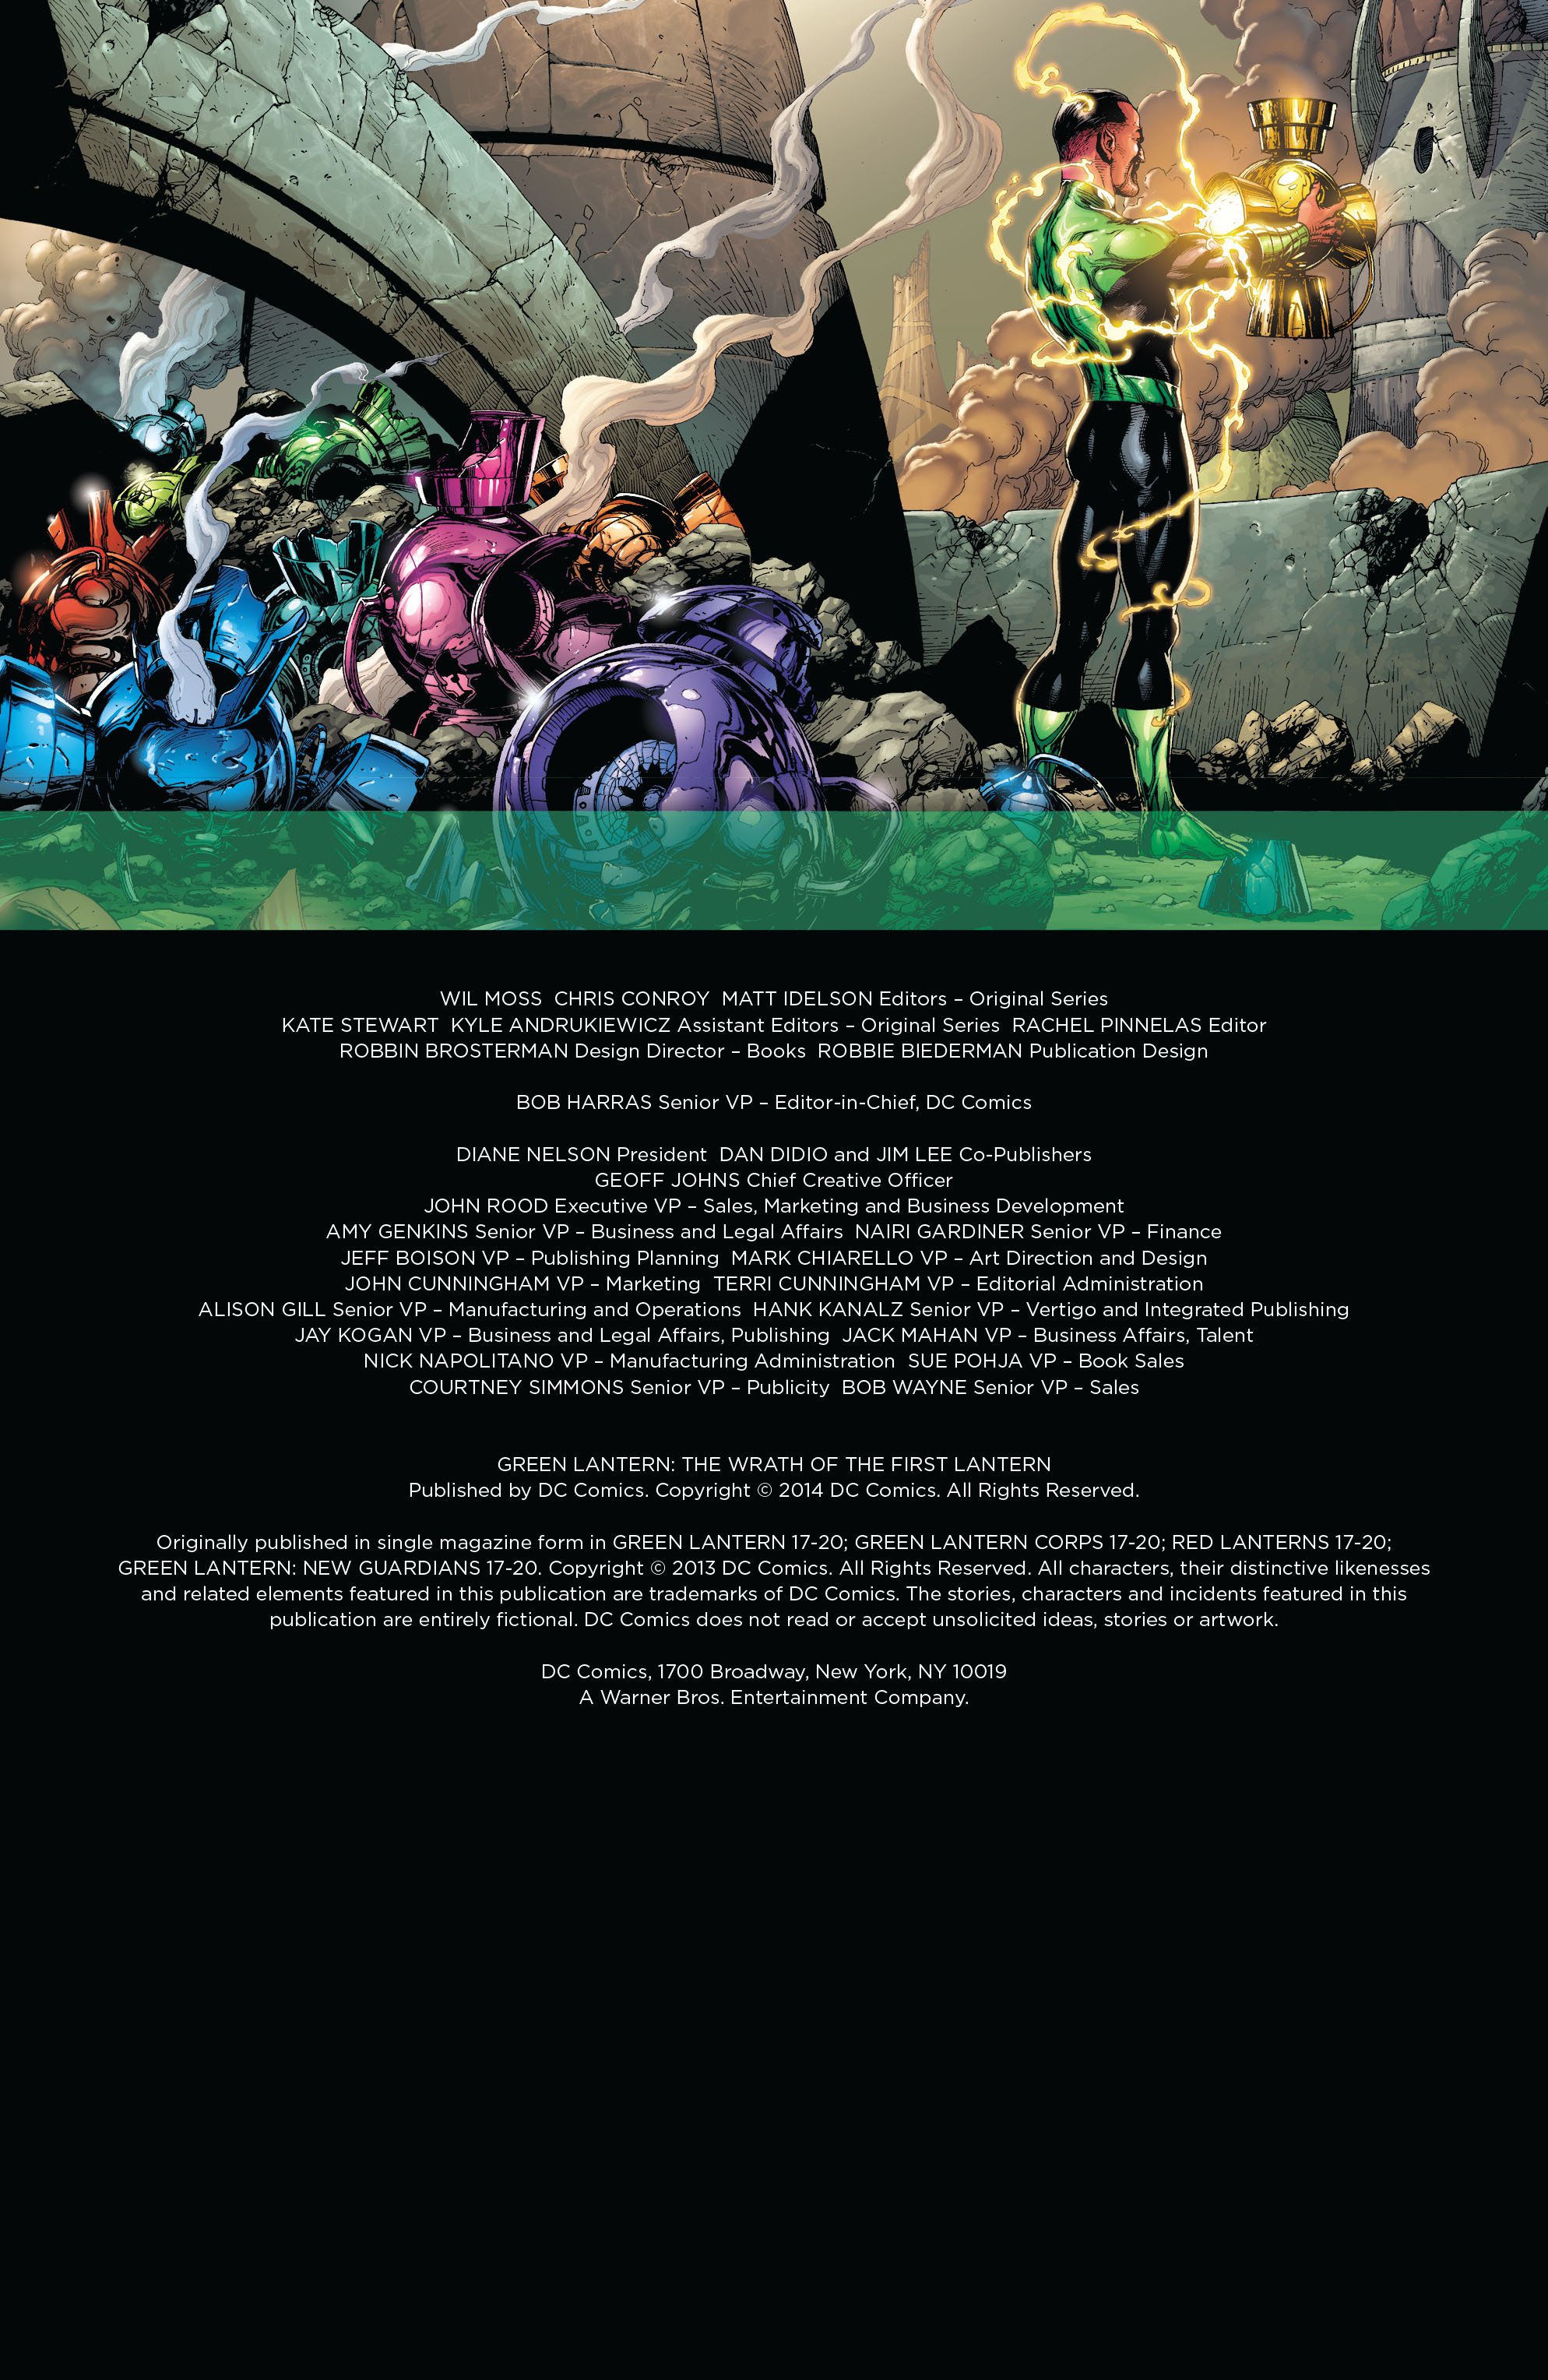 Read online Green Lantern: The Wrath of the First Lantern comic -  Issue # TPB - 4